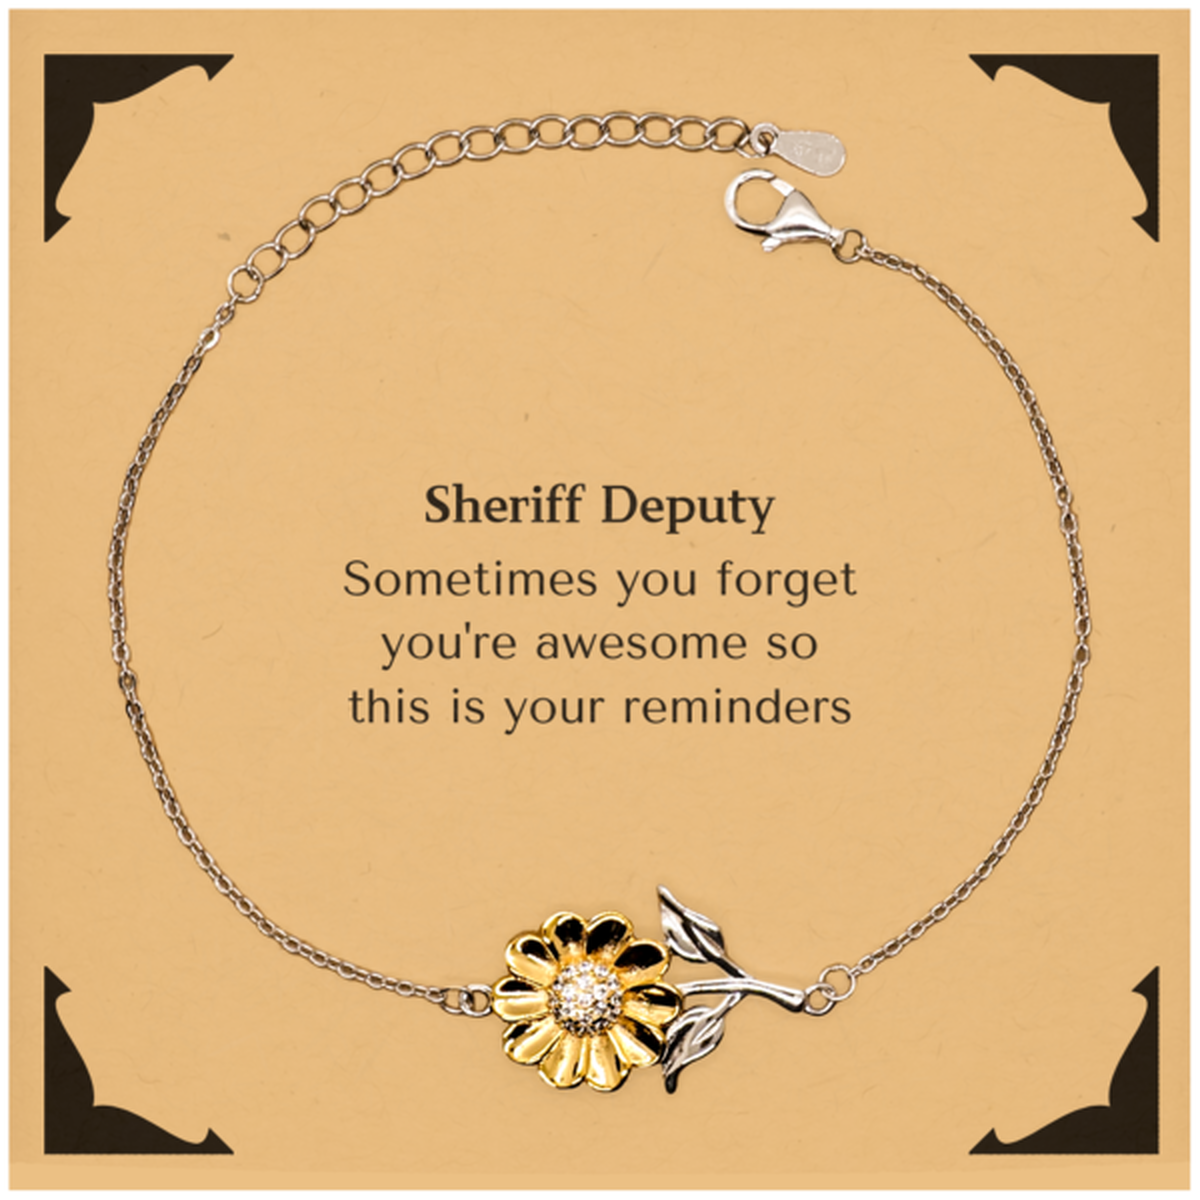 Sentimental Sheriff Deputy Sunflower Bracelet, Sheriff Deputy Sometimes you forget you're awesome so this is your reminders, Graduation Christmas Birthday Gifts for Sheriff Deputy, Men, Women, Coworkers